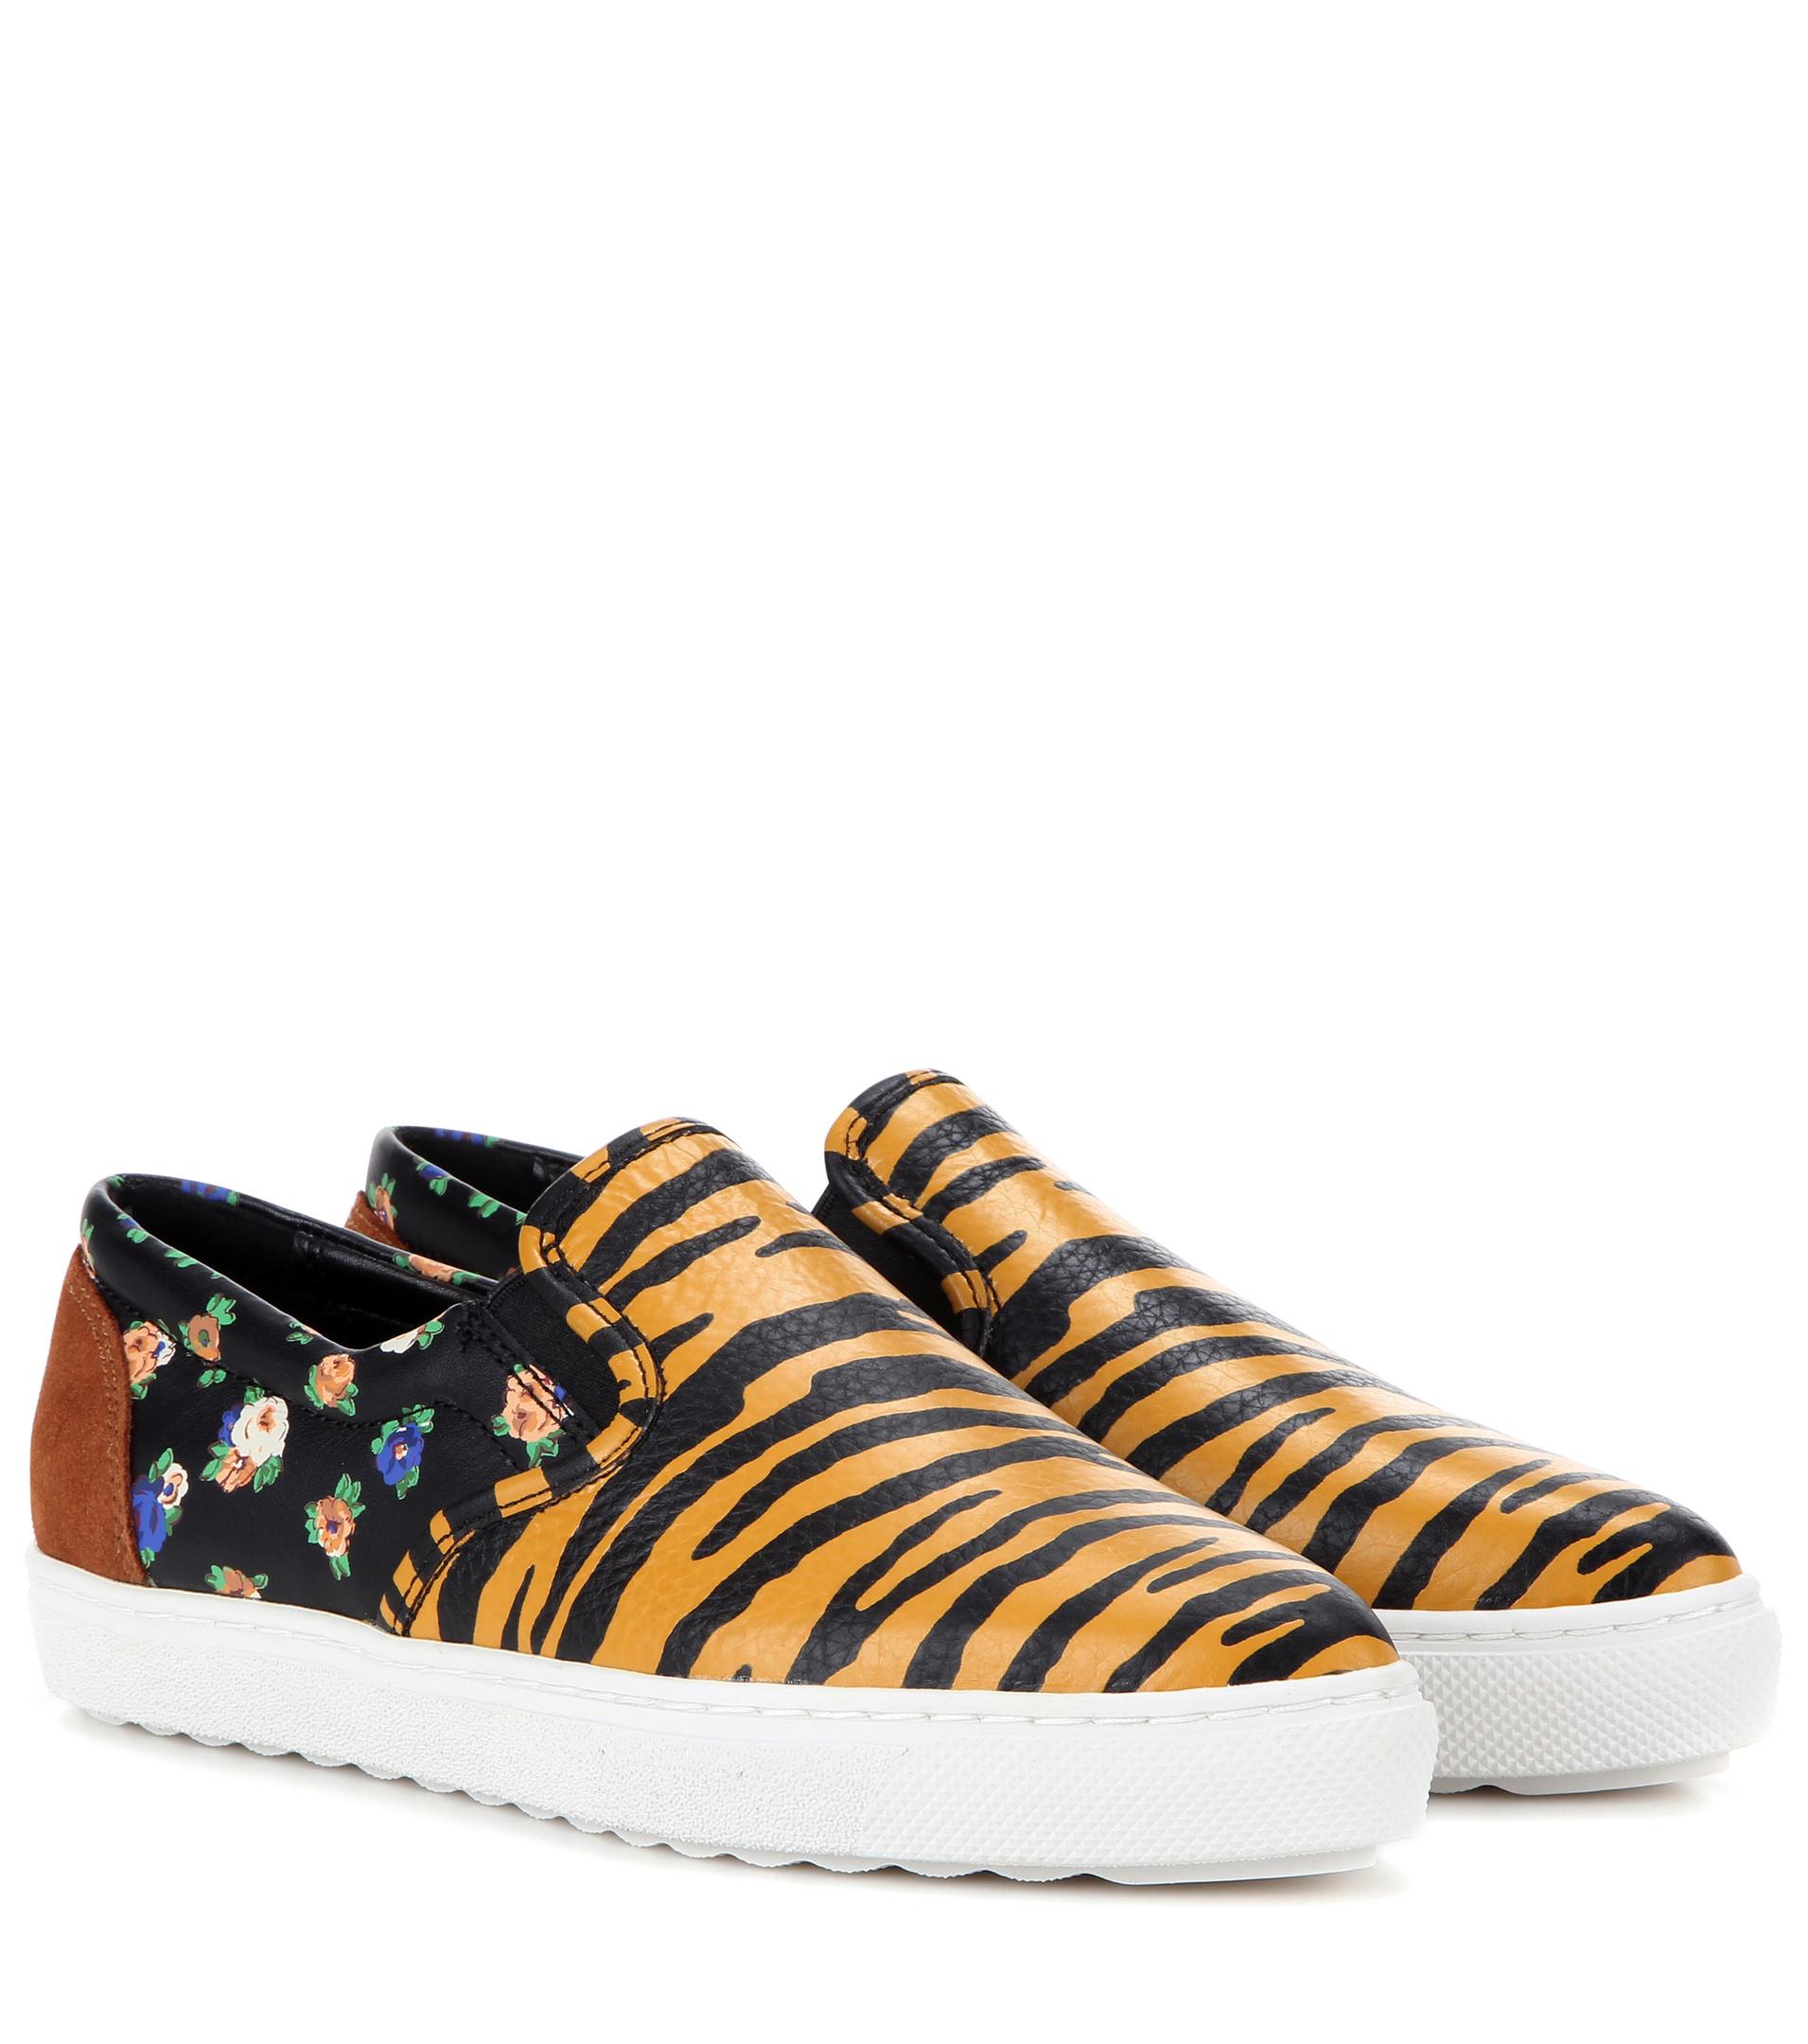 Lyst - Coach Printed Leather Slip-on Sneakers